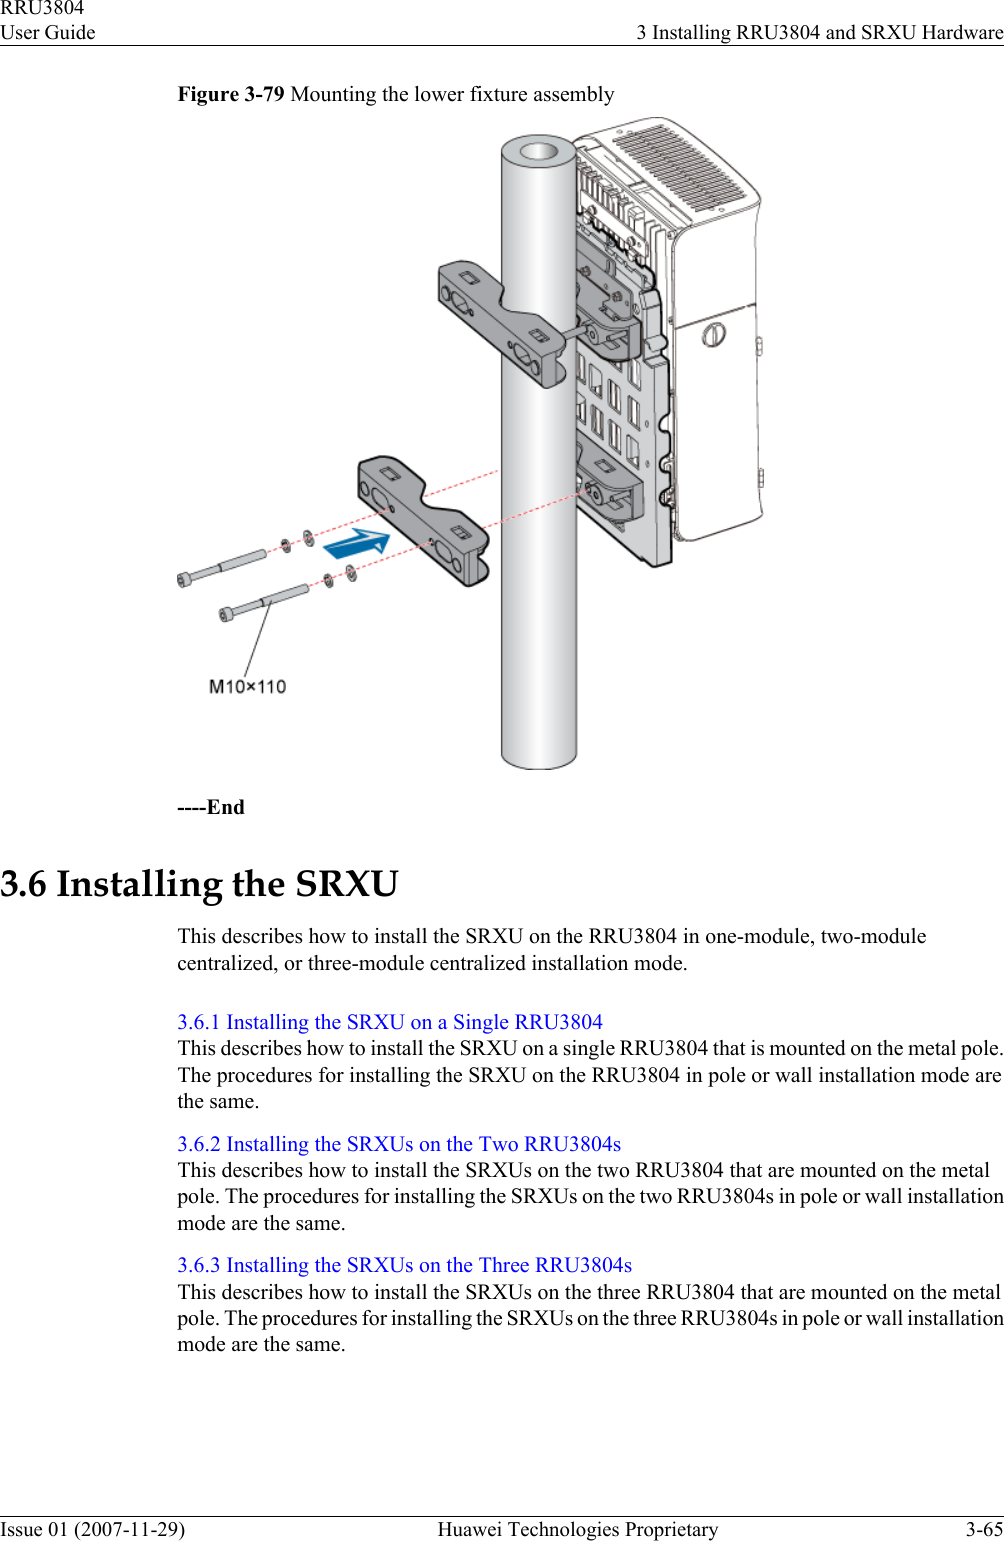 Figure 3-79 Mounting the lower fixture assembly----End3.6 Installing the SRXUThis describes how to install the SRXU on the RRU3804 in one-module, two-modulecentralized, or three-module centralized installation mode.3.6.1 Installing the SRXU on a Single RRU3804This describes how to install the SRXU on a single RRU3804 that is mounted on the metal pole.The procedures for installing the SRXU on the RRU3804 in pole or wall installation mode arethe same.3.6.2 Installing the SRXUs on the Two RRU3804sThis describes how to install the SRXUs on the two RRU3804 that are mounted on the metalpole. The procedures for installing the SRXUs on the two RRU3804s in pole or wall installationmode are the same.3.6.3 Installing the SRXUs on the Three RRU3804sThis describes how to install the SRXUs on the three RRU3804 that are mounted on the metalpole. The procedures for installing the SRXUs on the three RRU3804s in pole or wall installationmode are the same.RRU3804User Guide 3 Installing RRU3804 and SRXU HardwareIssue 01 (2007-11-29)  Huawei Technologies Proprietary 3-65